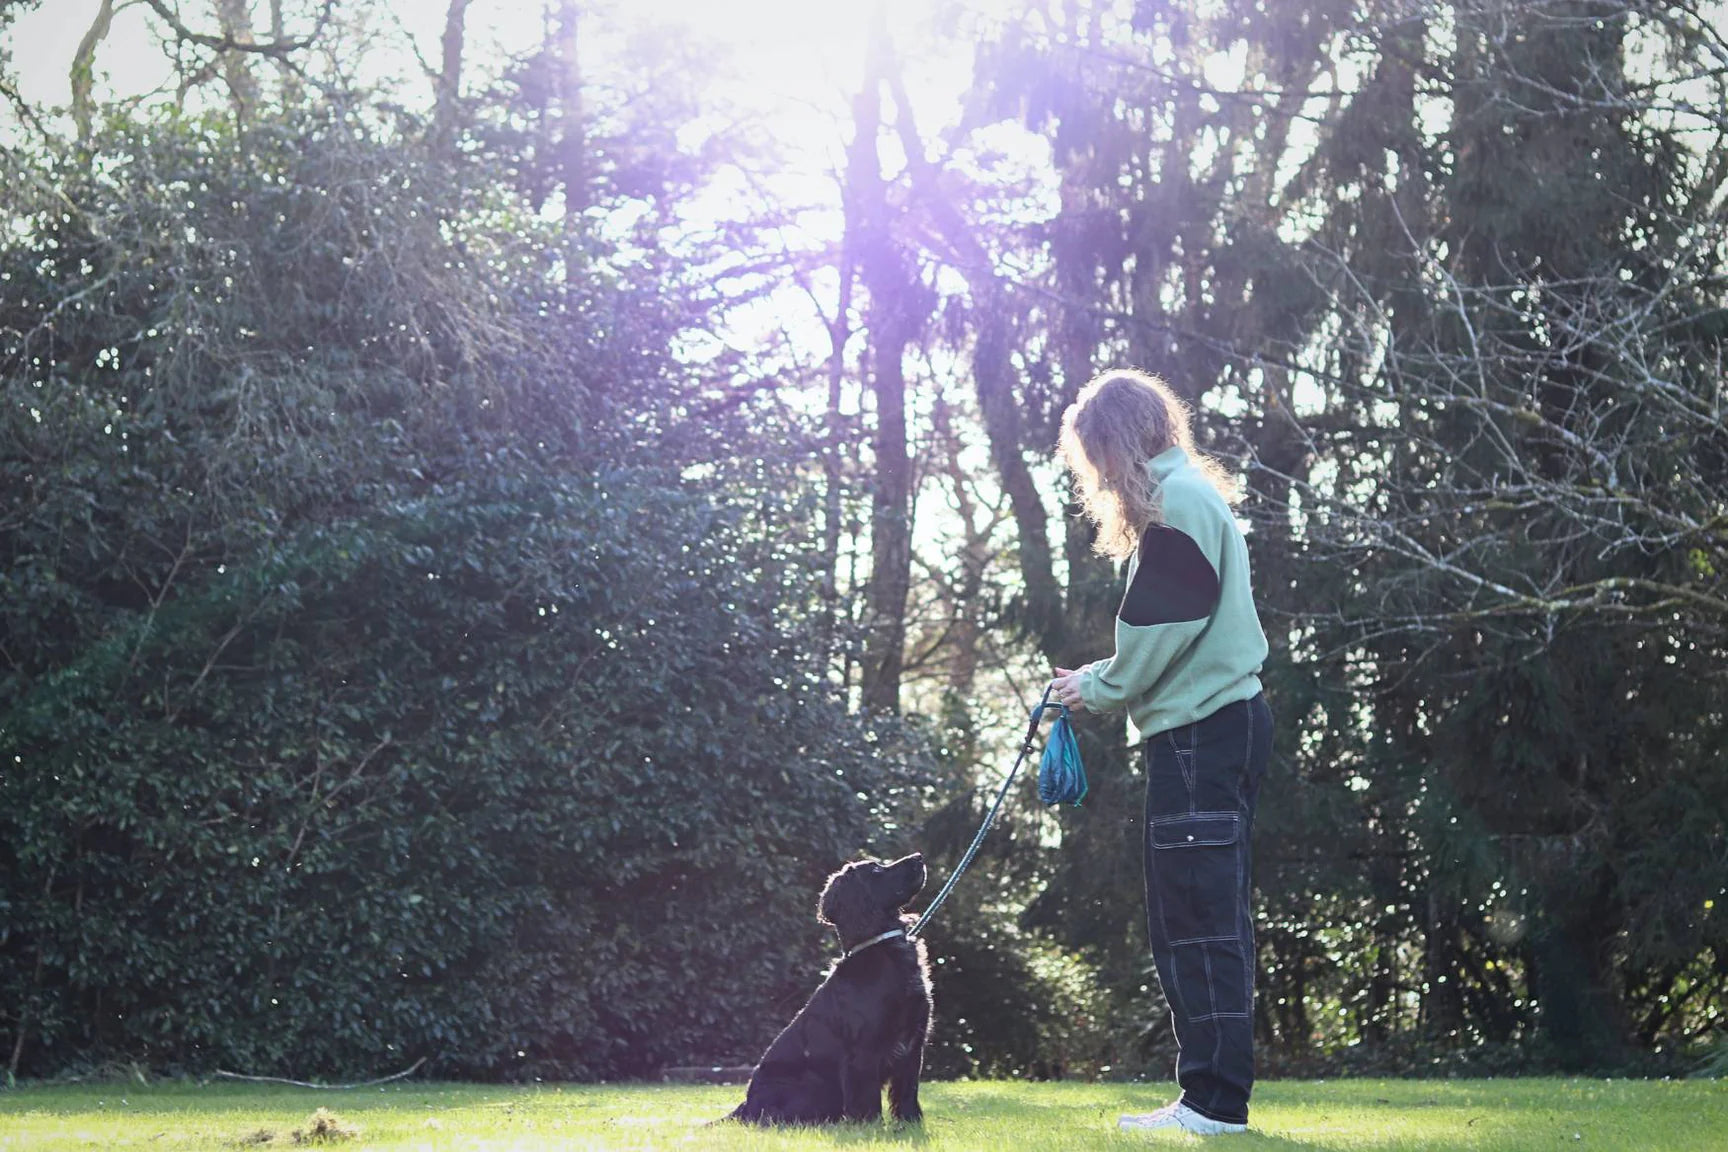 A picture of a woman and a dog in an outdoor setting